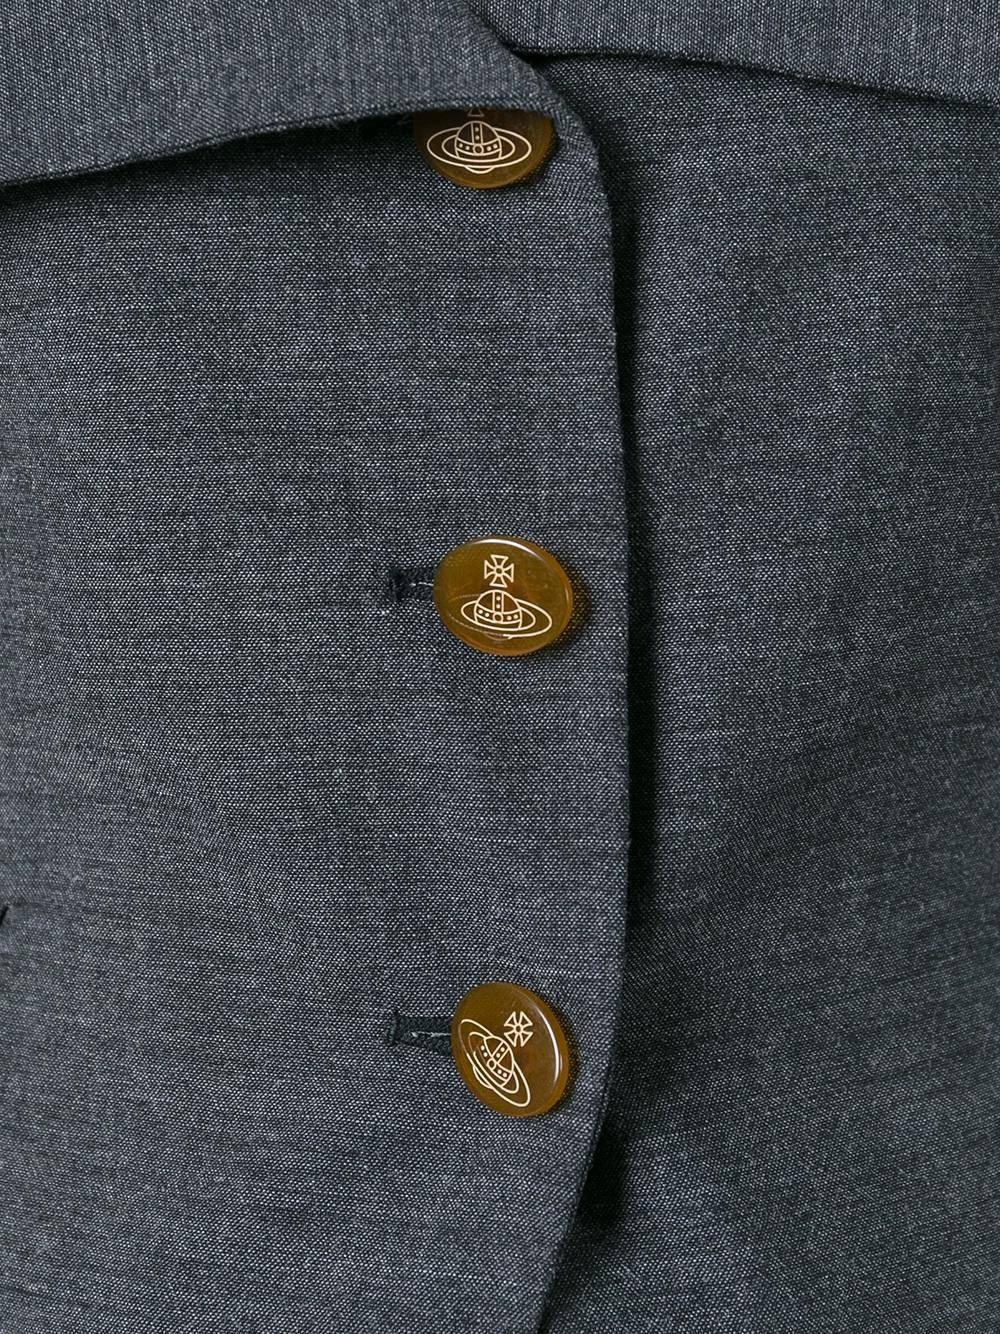 1990s Grey wool blend 'Red Label' jacket from Vivienne Westwood Vintage featuring a spread collar, a wide lapel, a front button fastening, front flap pockets, long sleeves and a straight hem.
Made in italy.
sie 40 IT.
Outer Composition
Wool